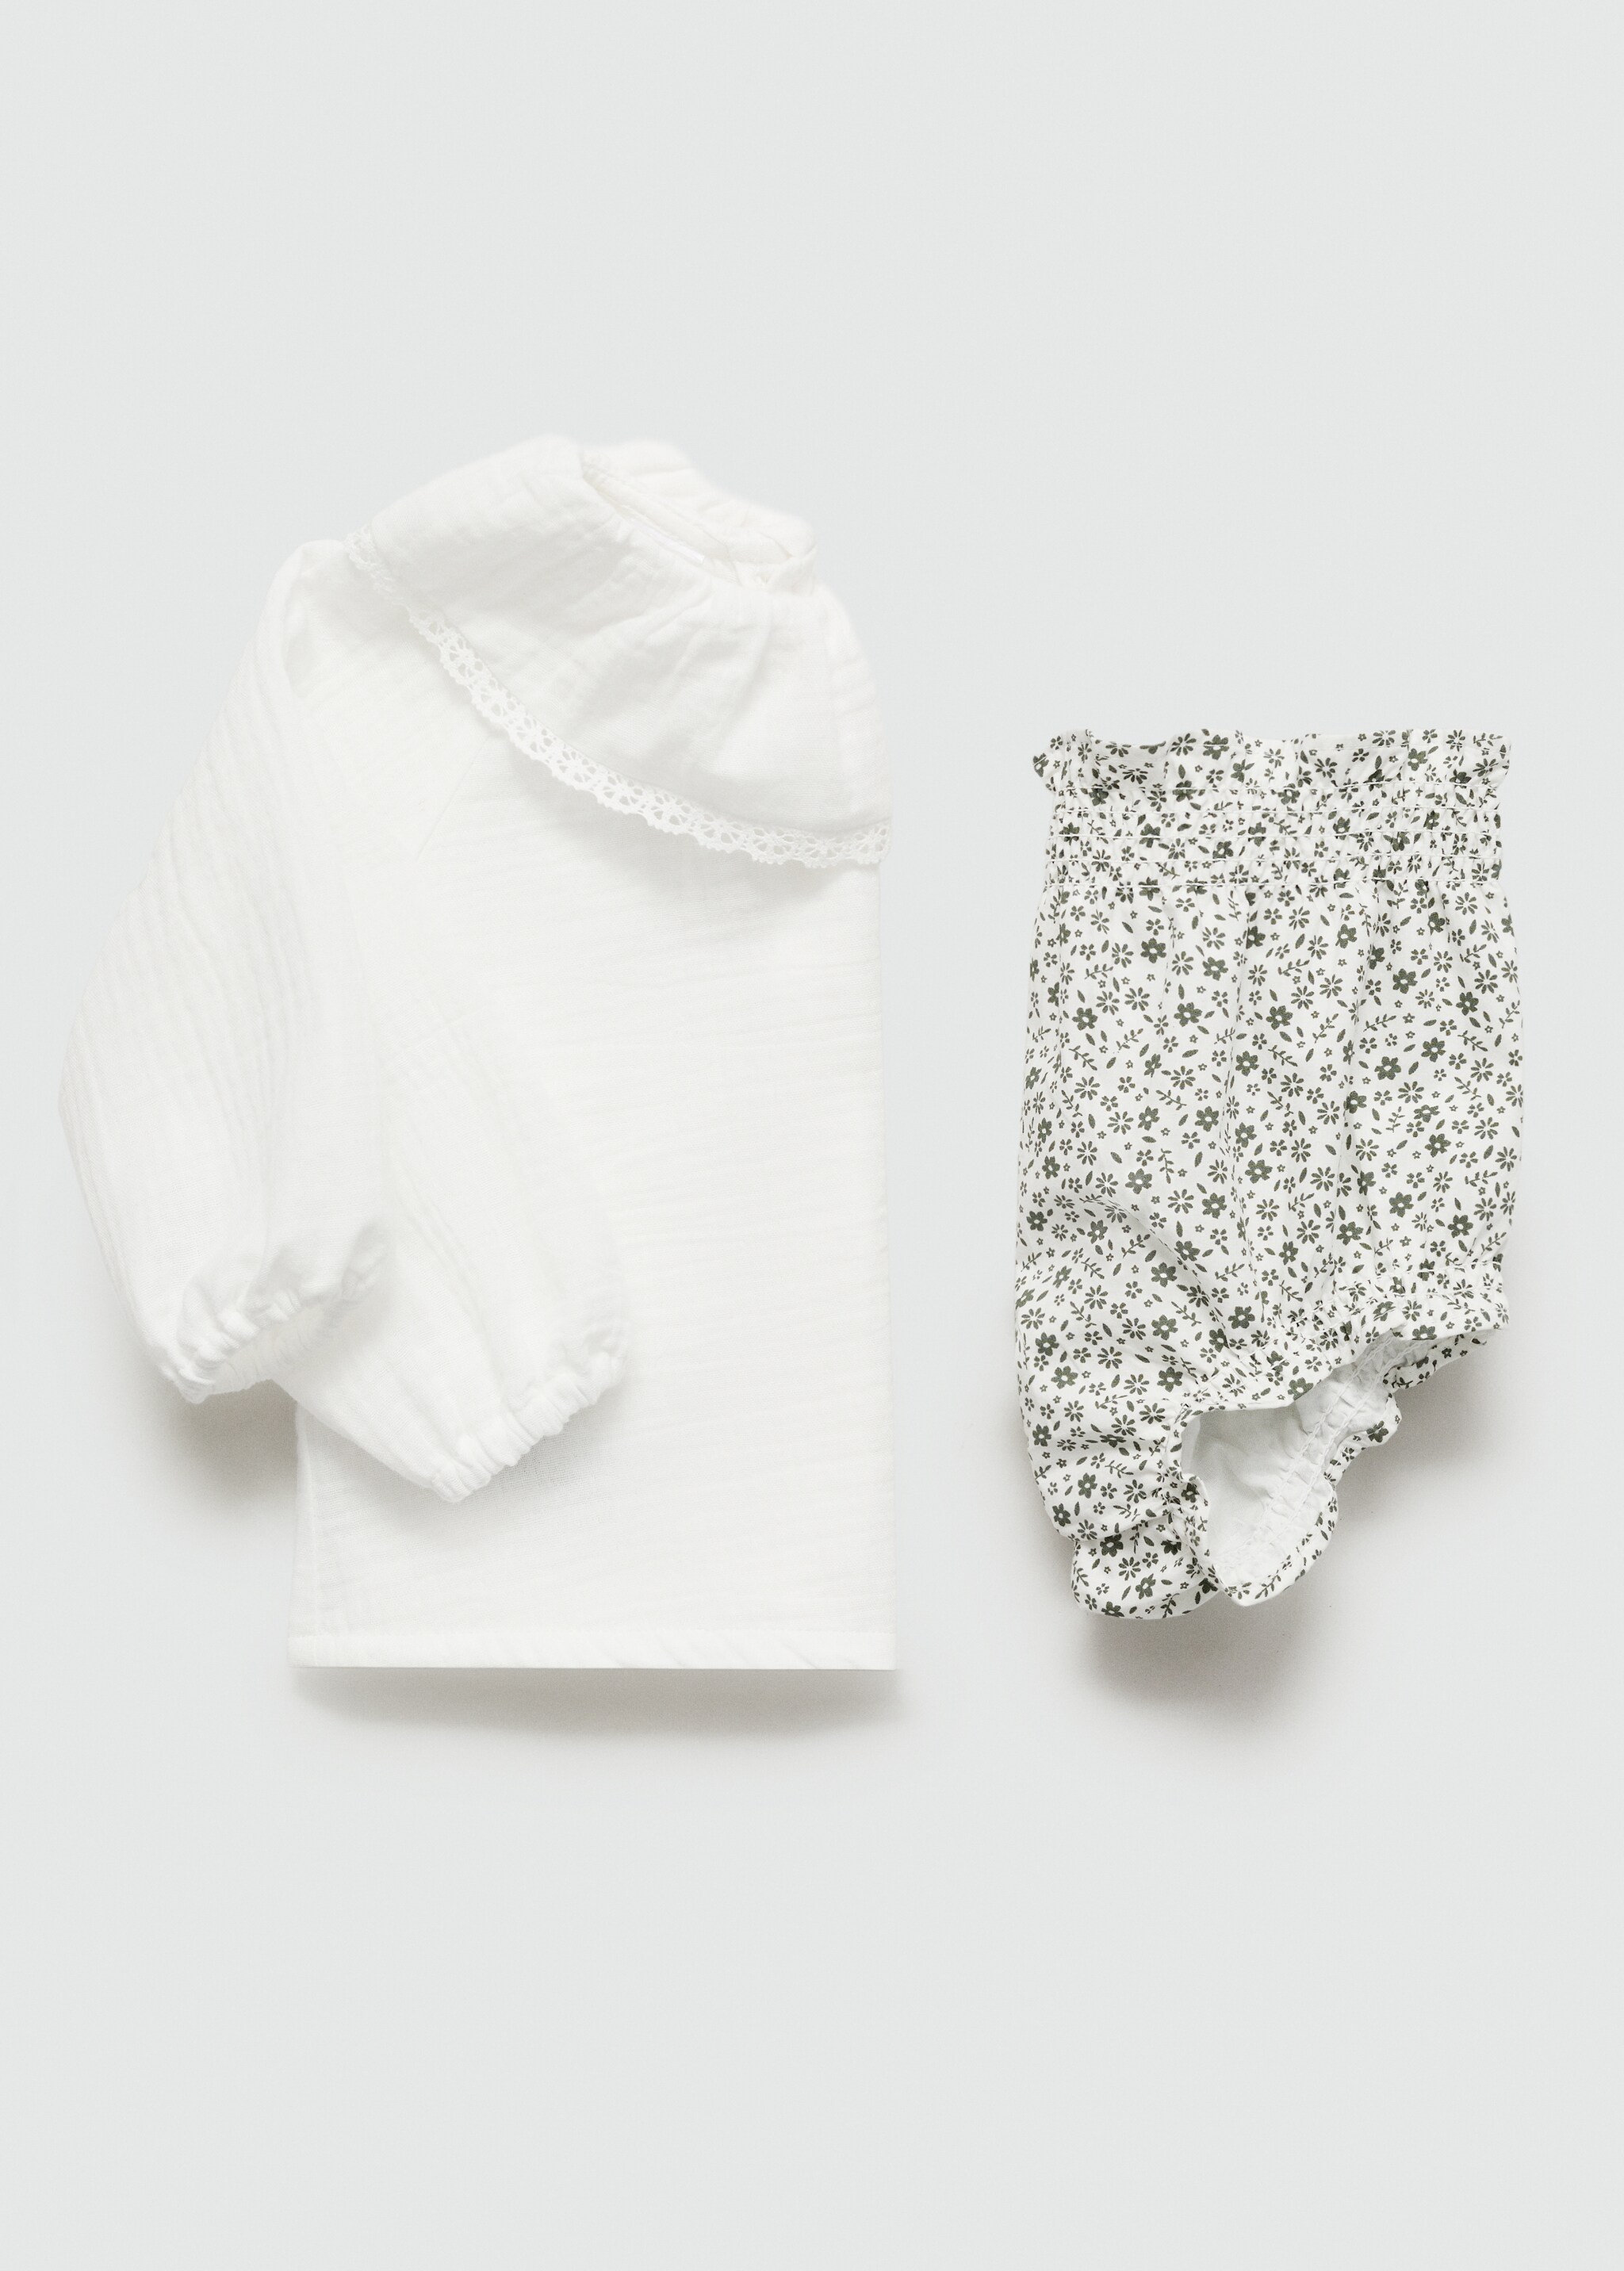 Textured cotton blouse - Details of the article 7